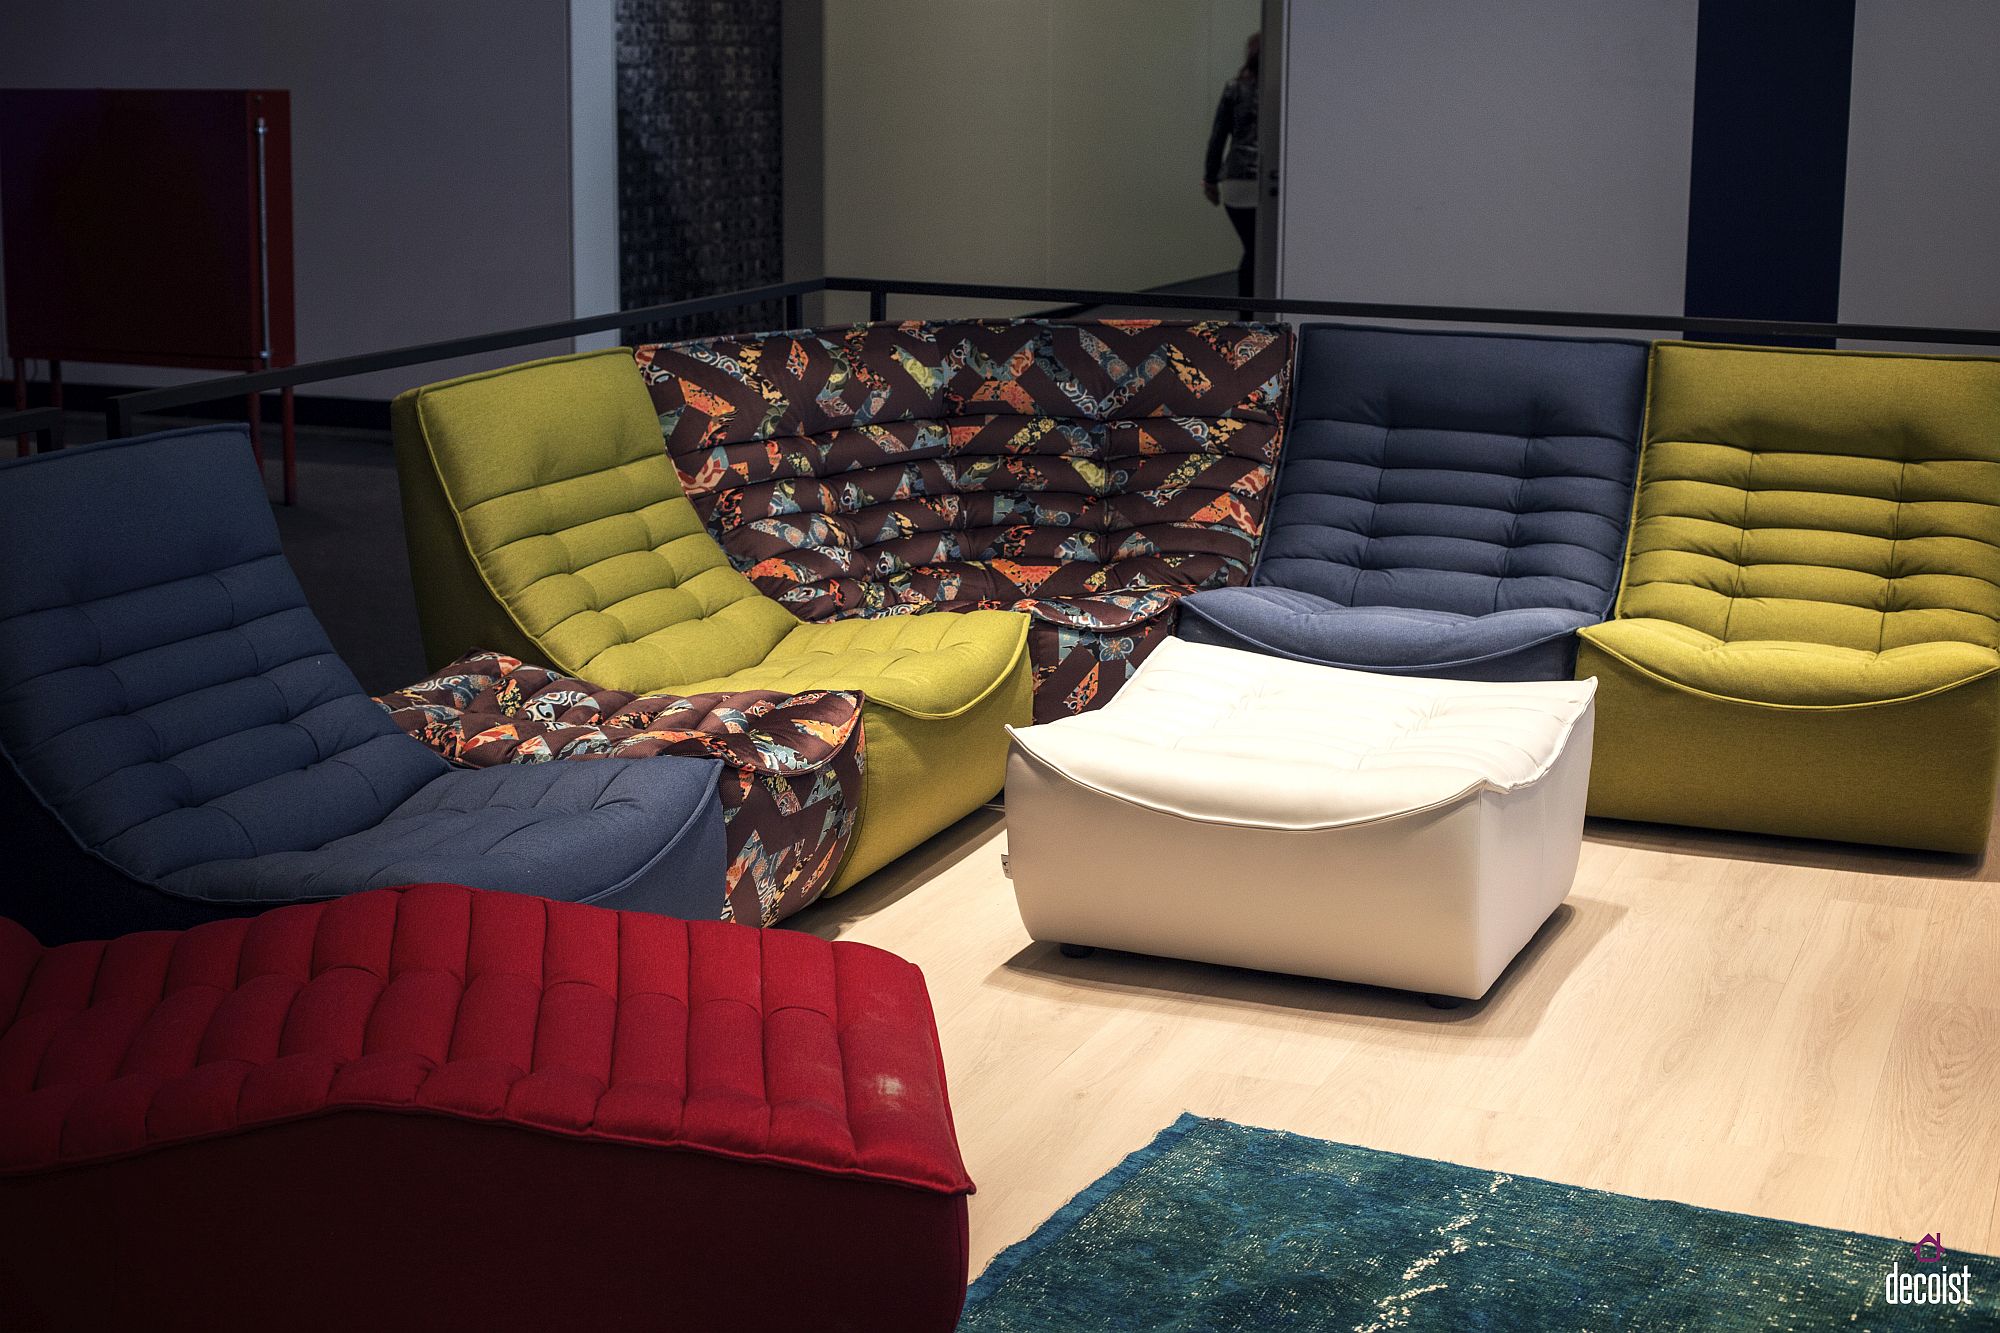 Adding-color-and-pattern-to-the-living-room-with-modular-sofa-units-from-Calia-Italia